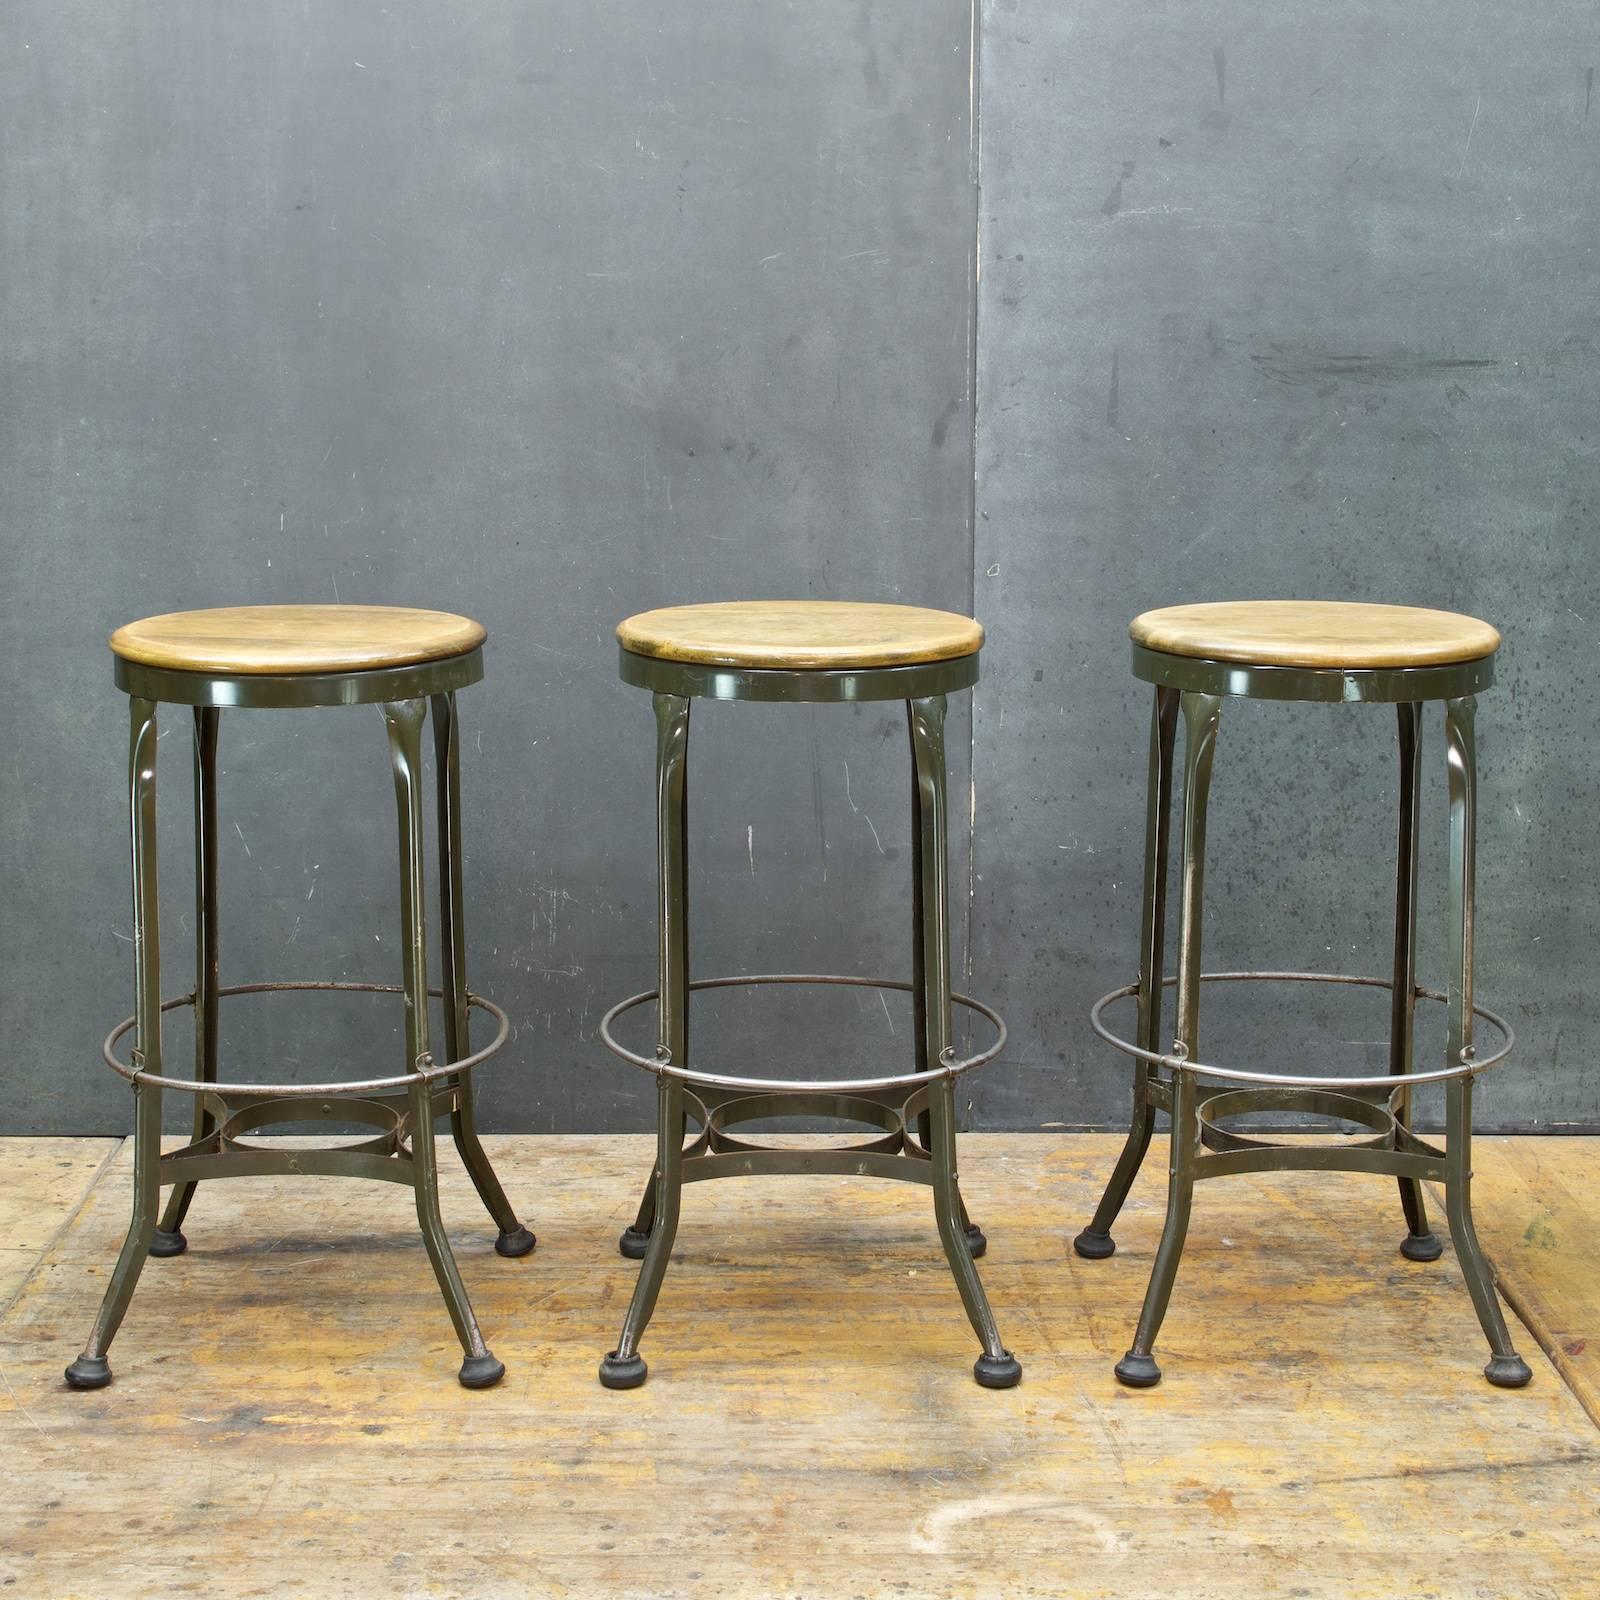 Set of three matching vintage tall toledo at a good bar height, overall in very good vintage condition. All fully functional, and each with all four of the big hockey puck glides!

Measures: Diameter 15 x height 29.25 in.